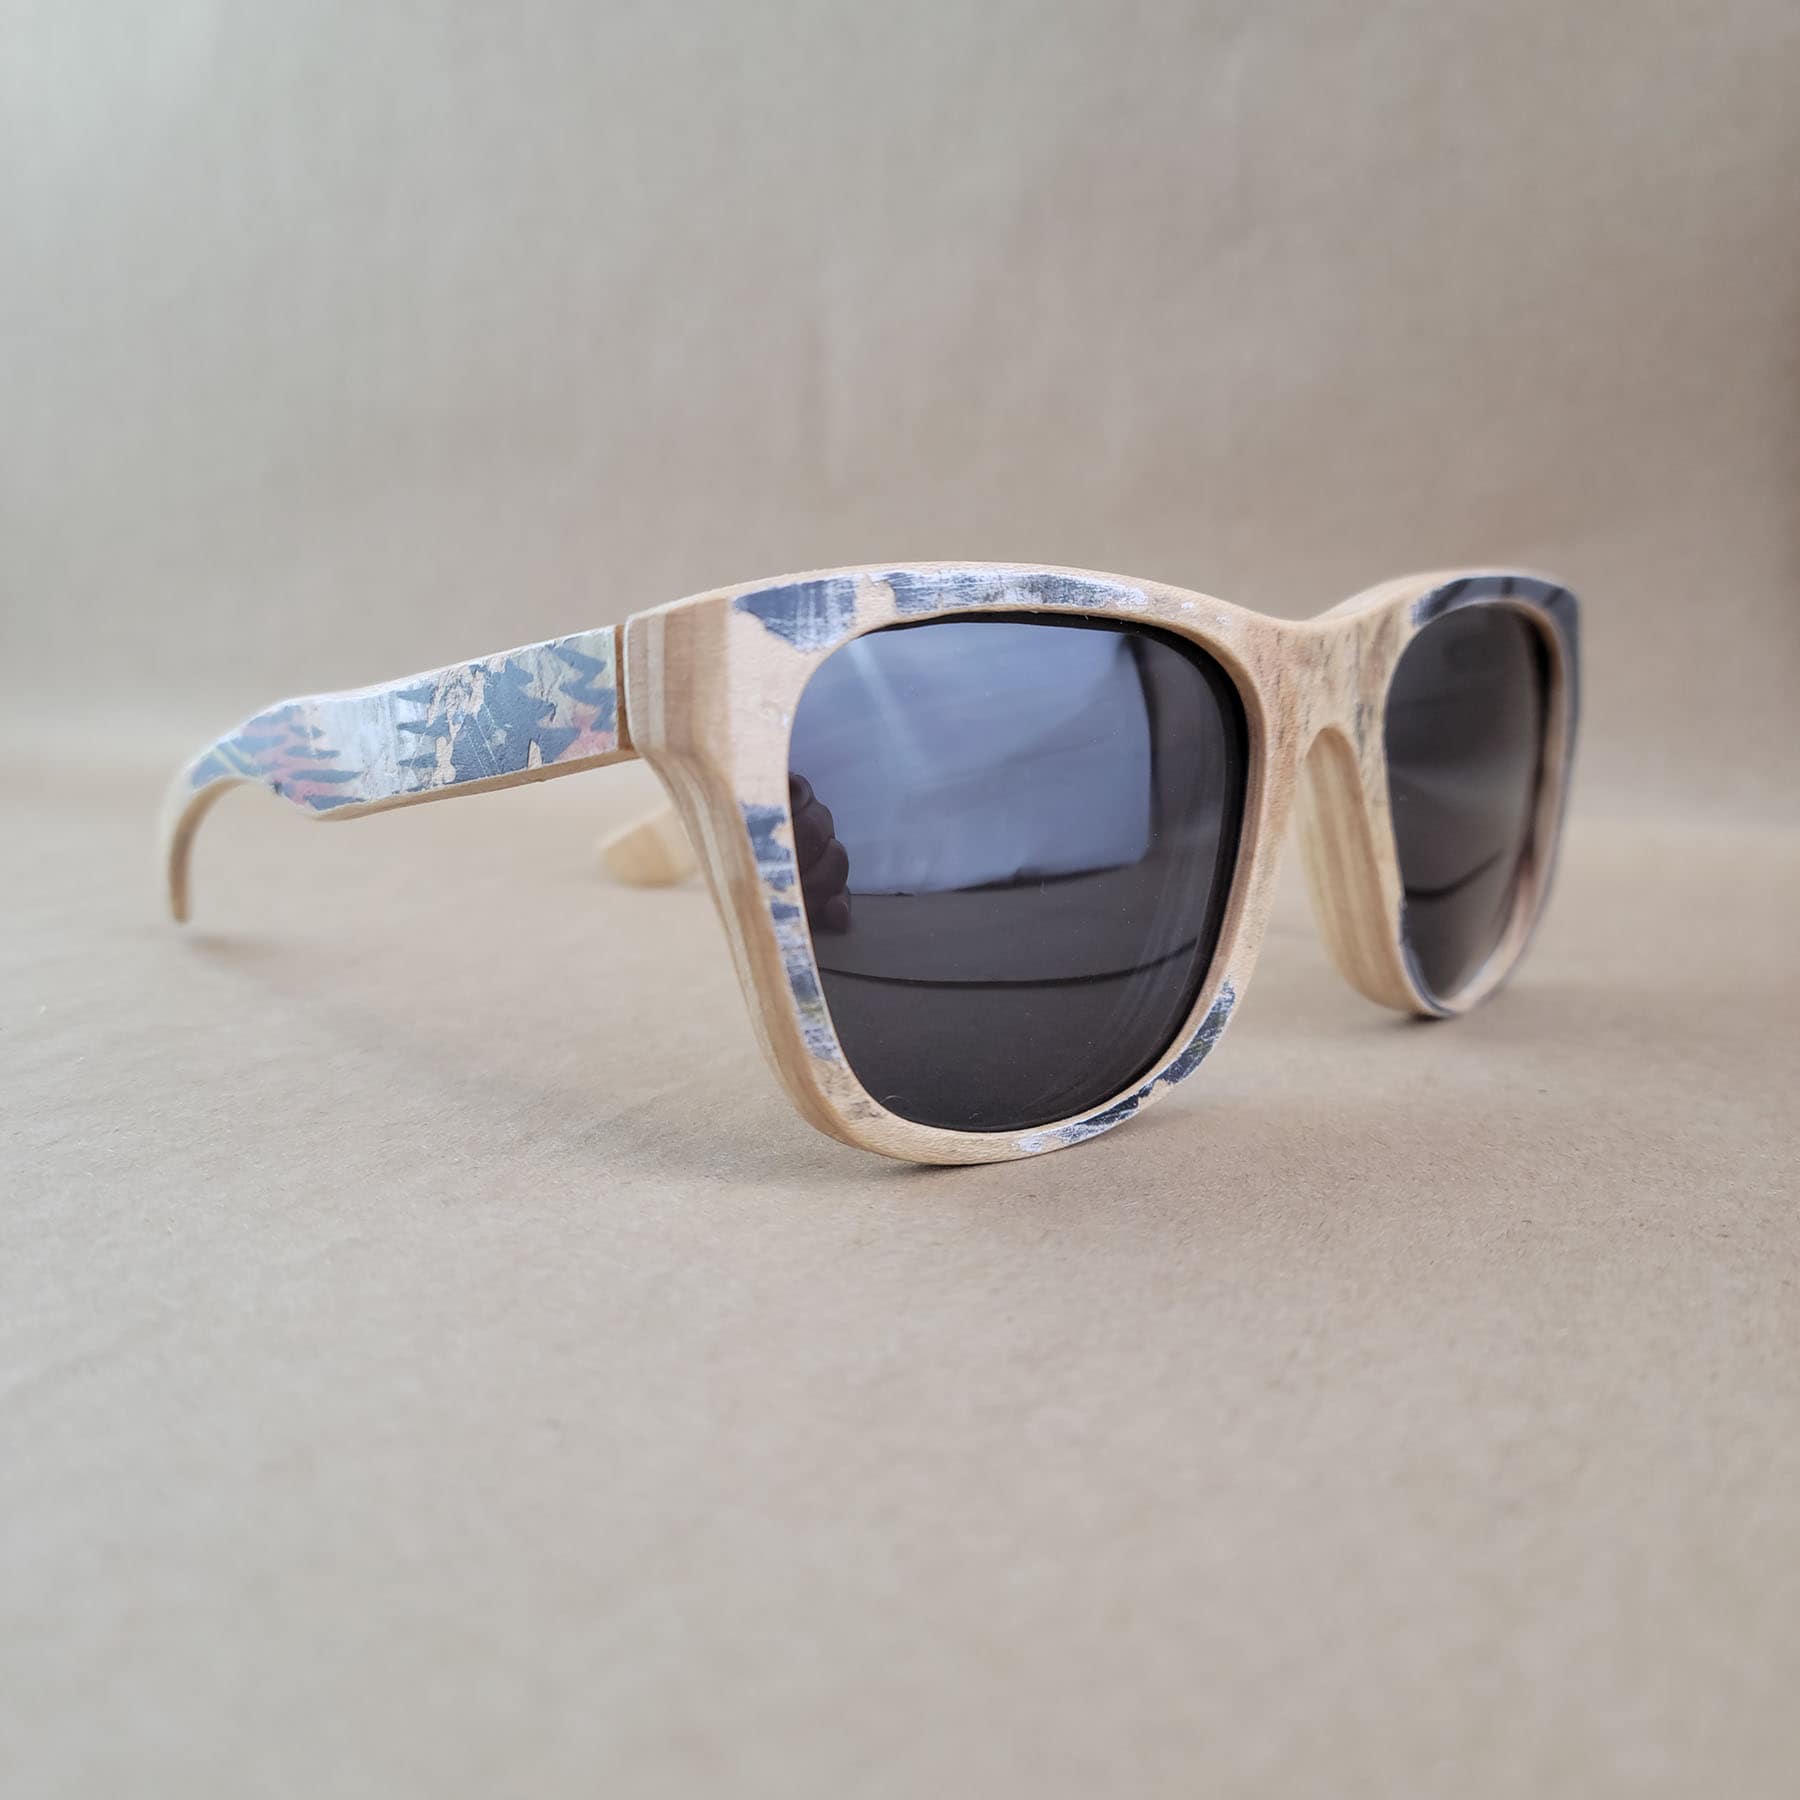 Kilian Martin Collection #1 – 6 of 6 Recycled Skateboard Sunglasses